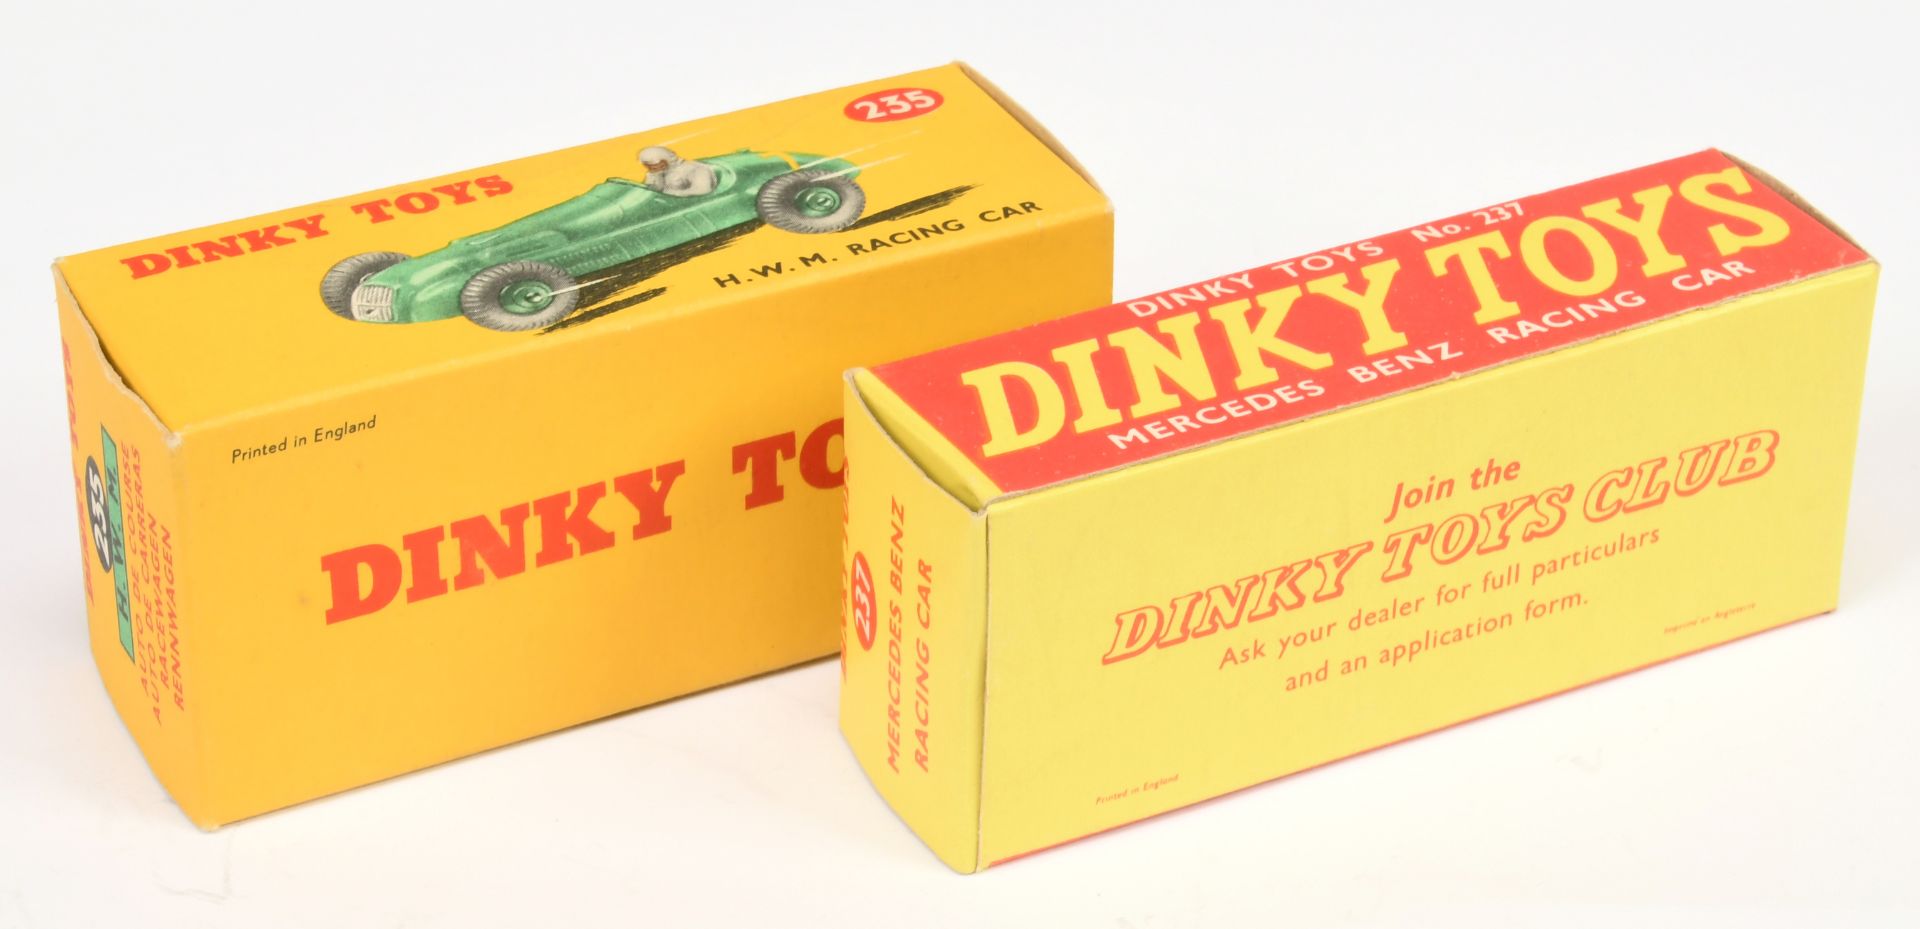 Dinky Toys Empty Boxes To Include (1) 235 HWM Racing Car - Yellow and red carded picture box is i... - Bild 2 aus 2